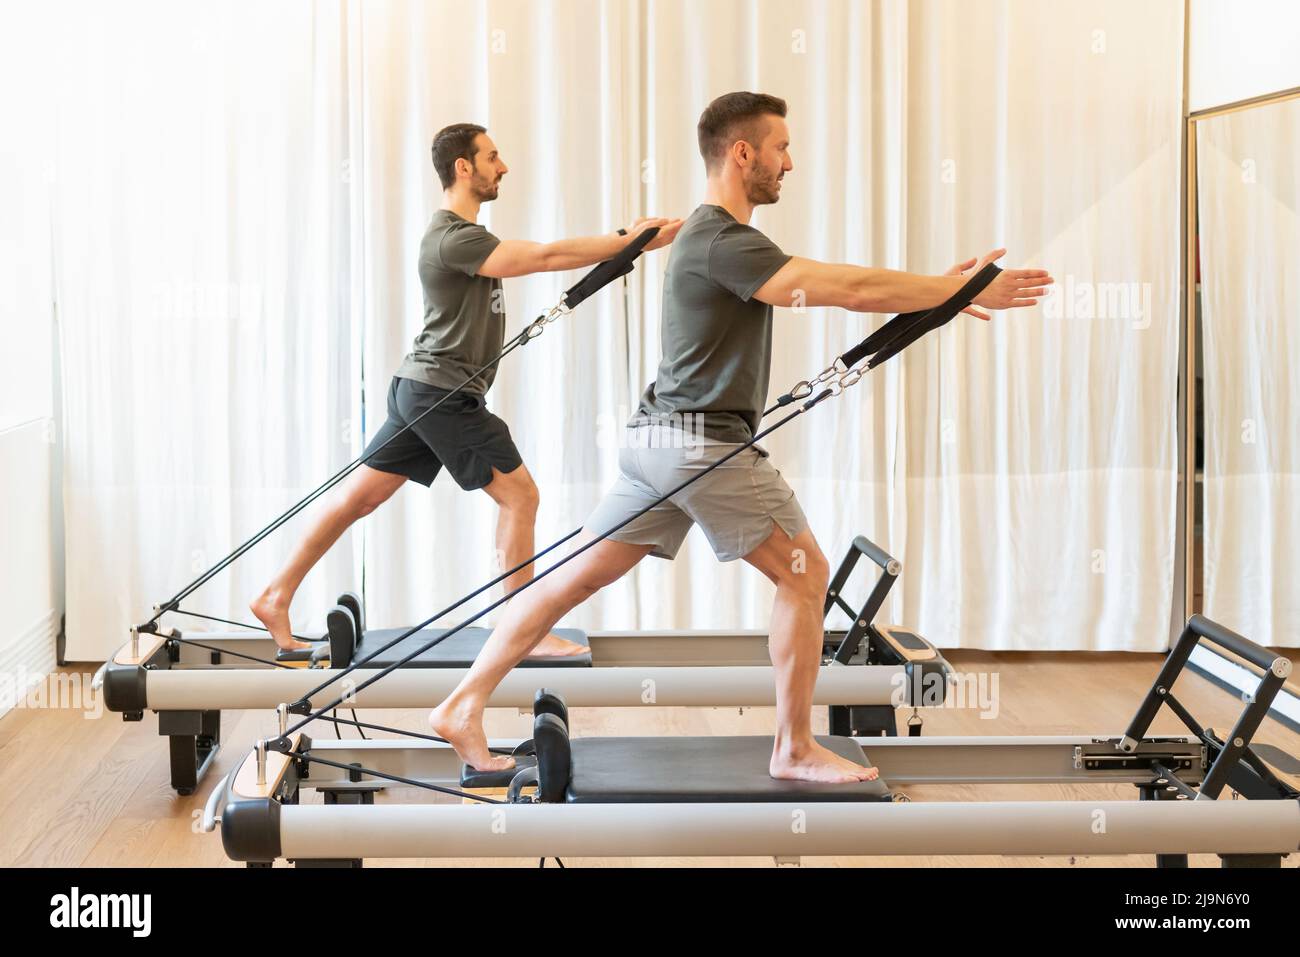 Side view full body of athletic males doing tree hugs exercise while standing on reformers during pilates class Stock Photo